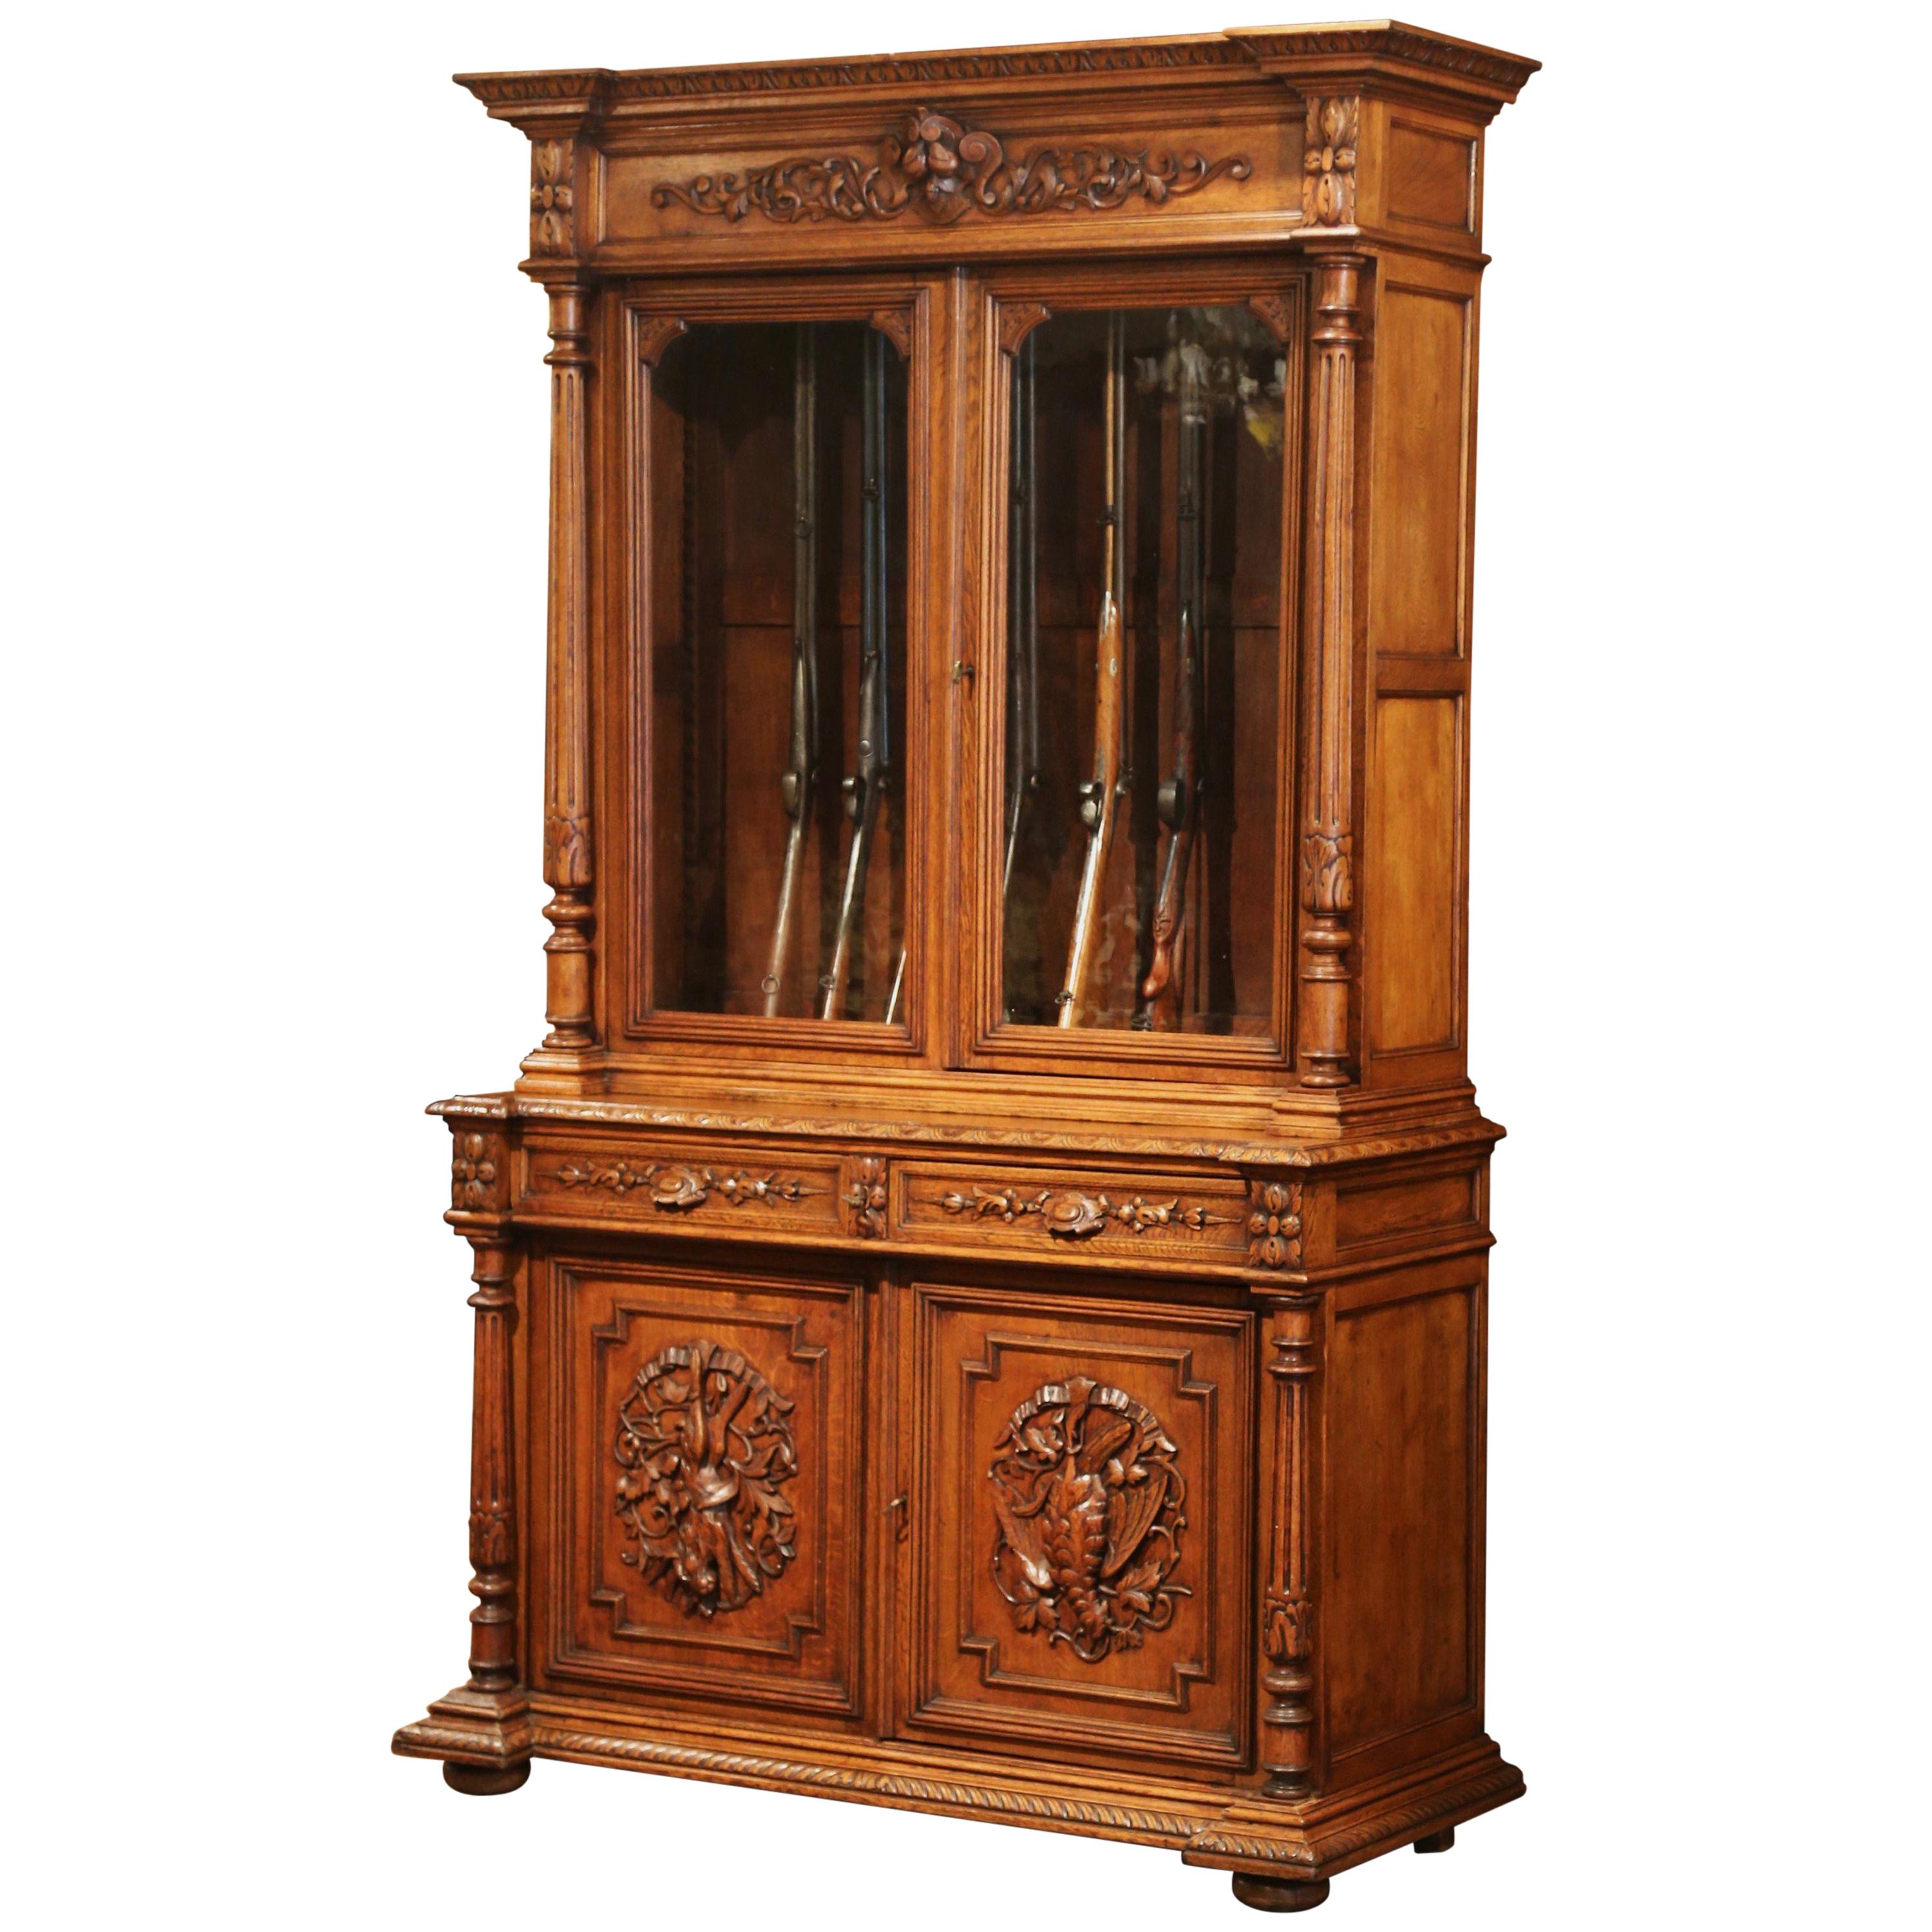 19th Century French Carved Oak Nine-Gun Display Buffet Cabinet with Hunt Motifs